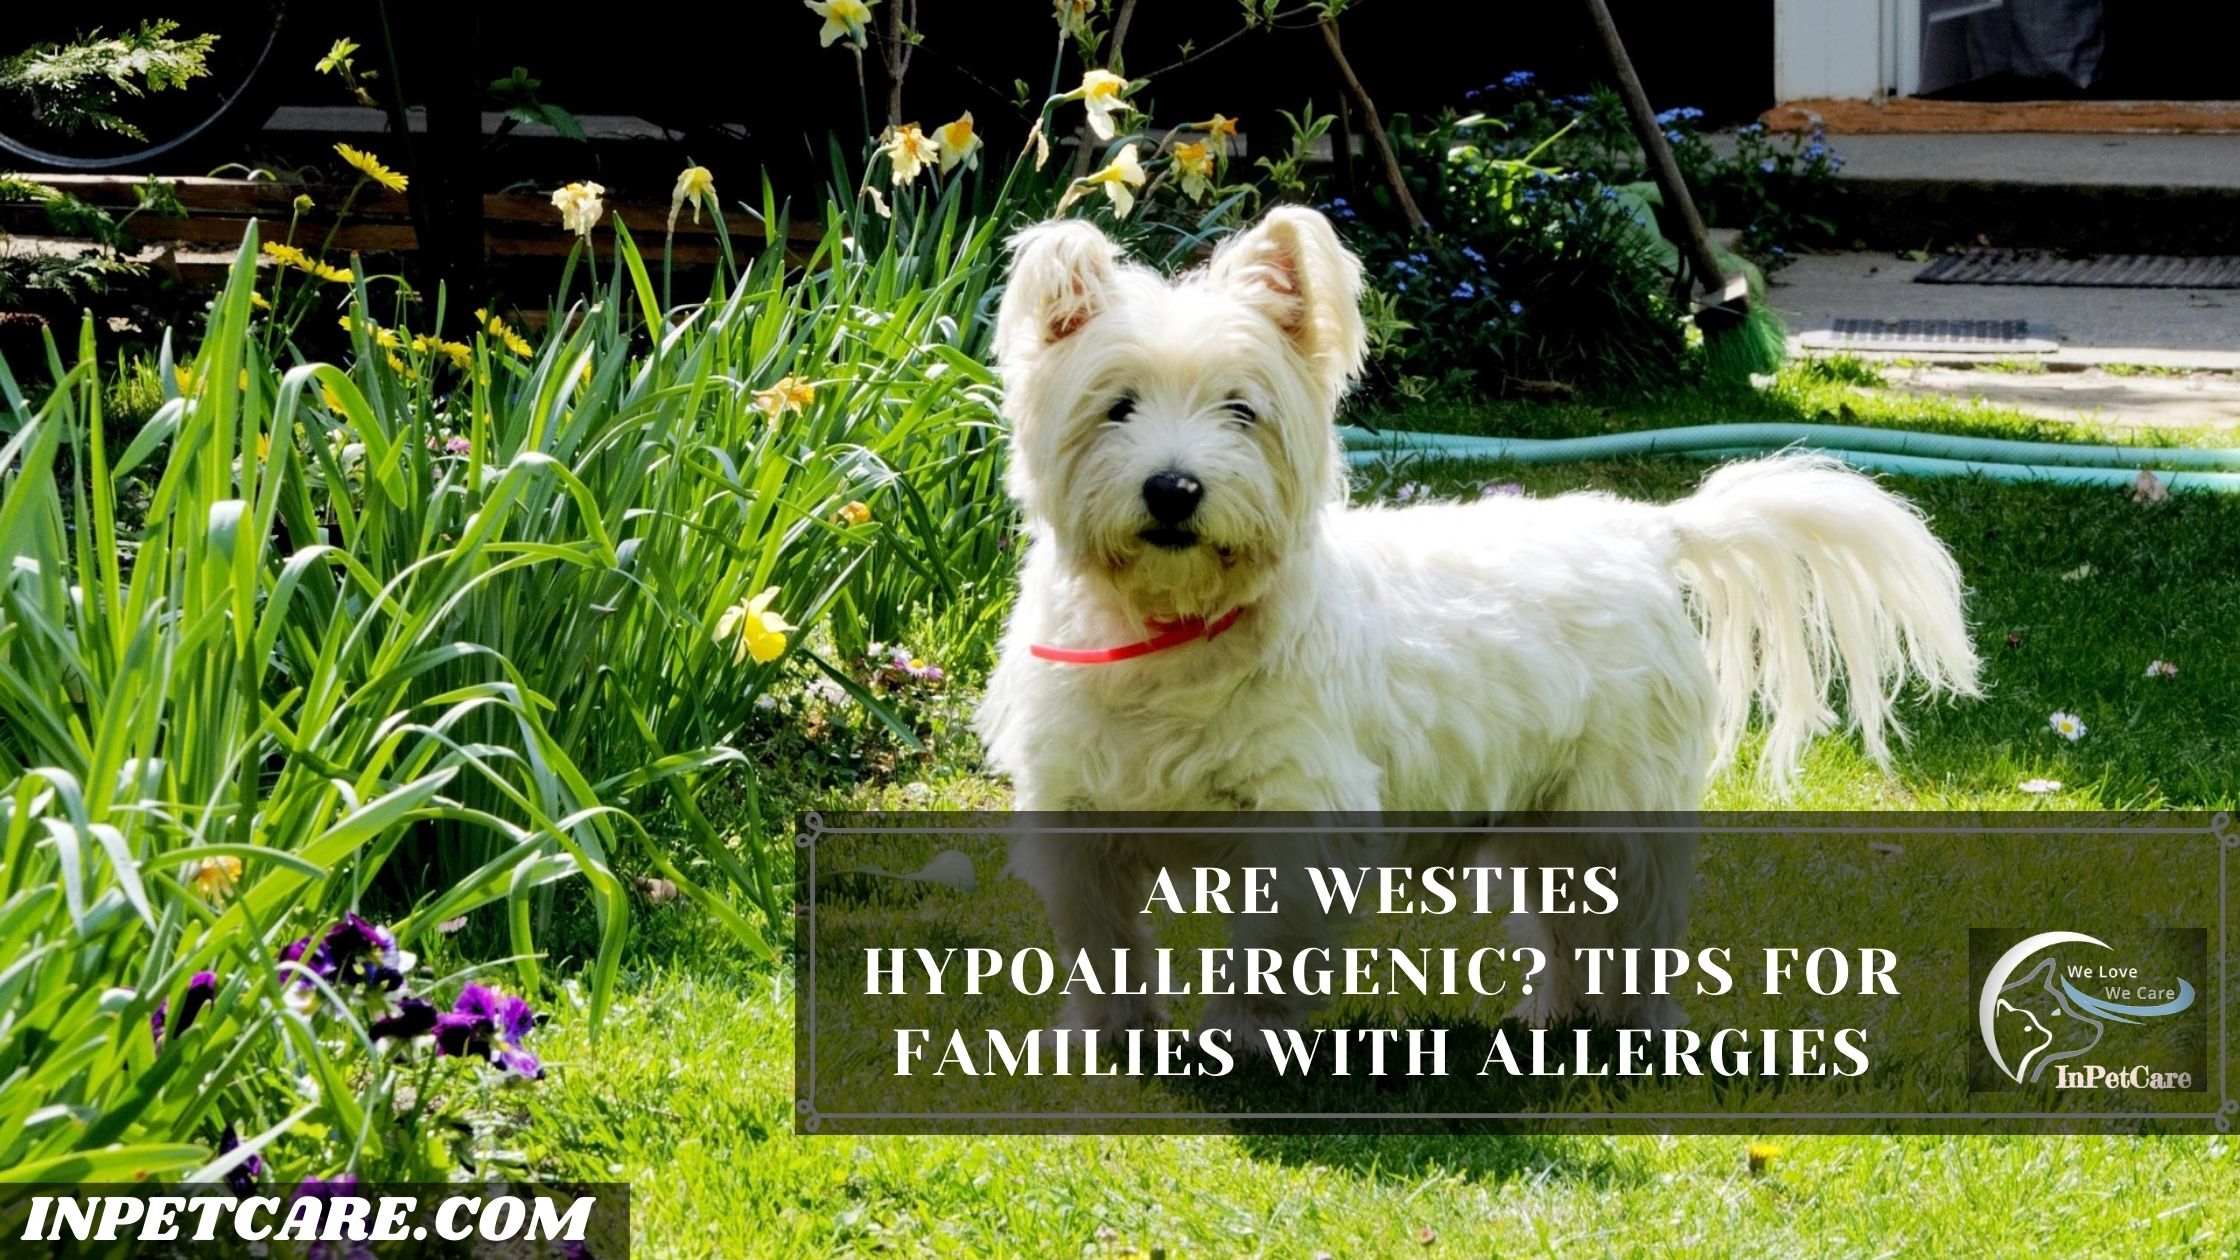 Are Westies Hypoallergenic? Tips For Families With Allergies